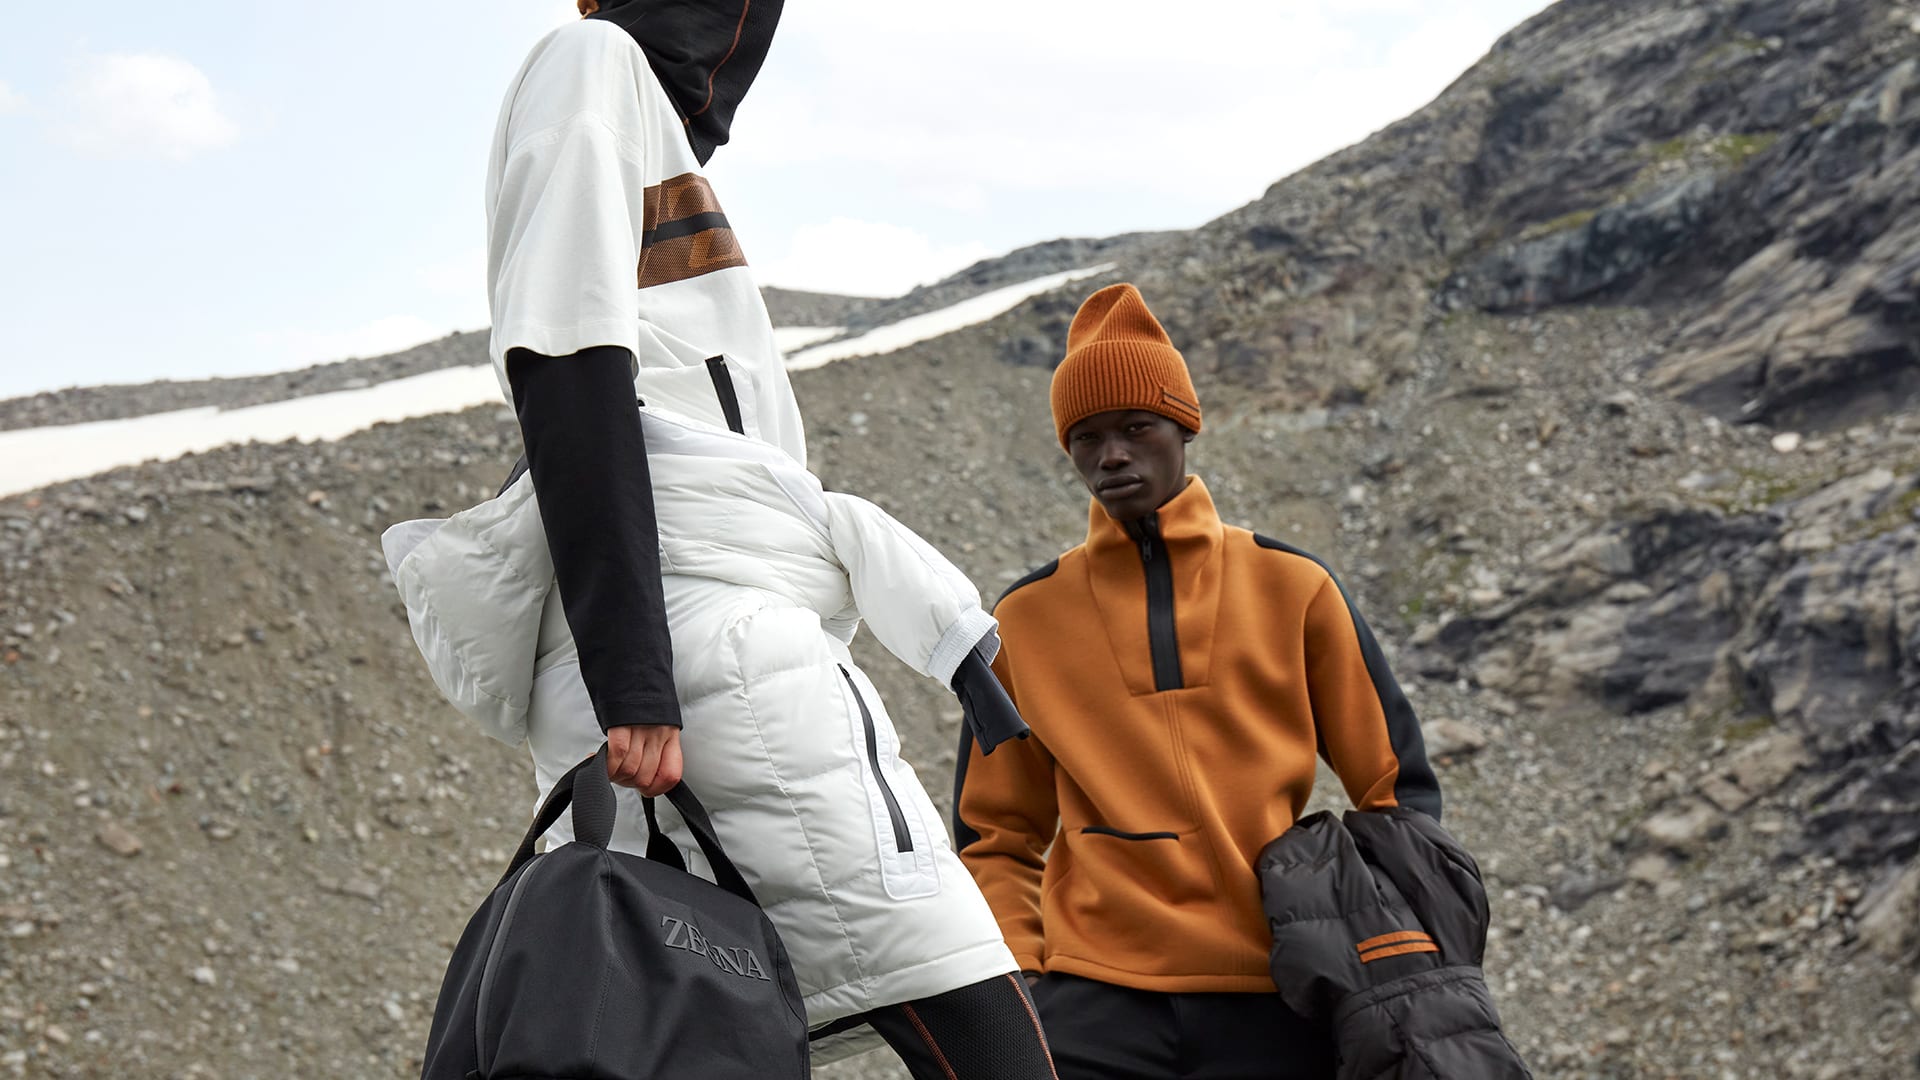 Zegna launching its new logo and a elevated Outdoor Capsule. | Complex